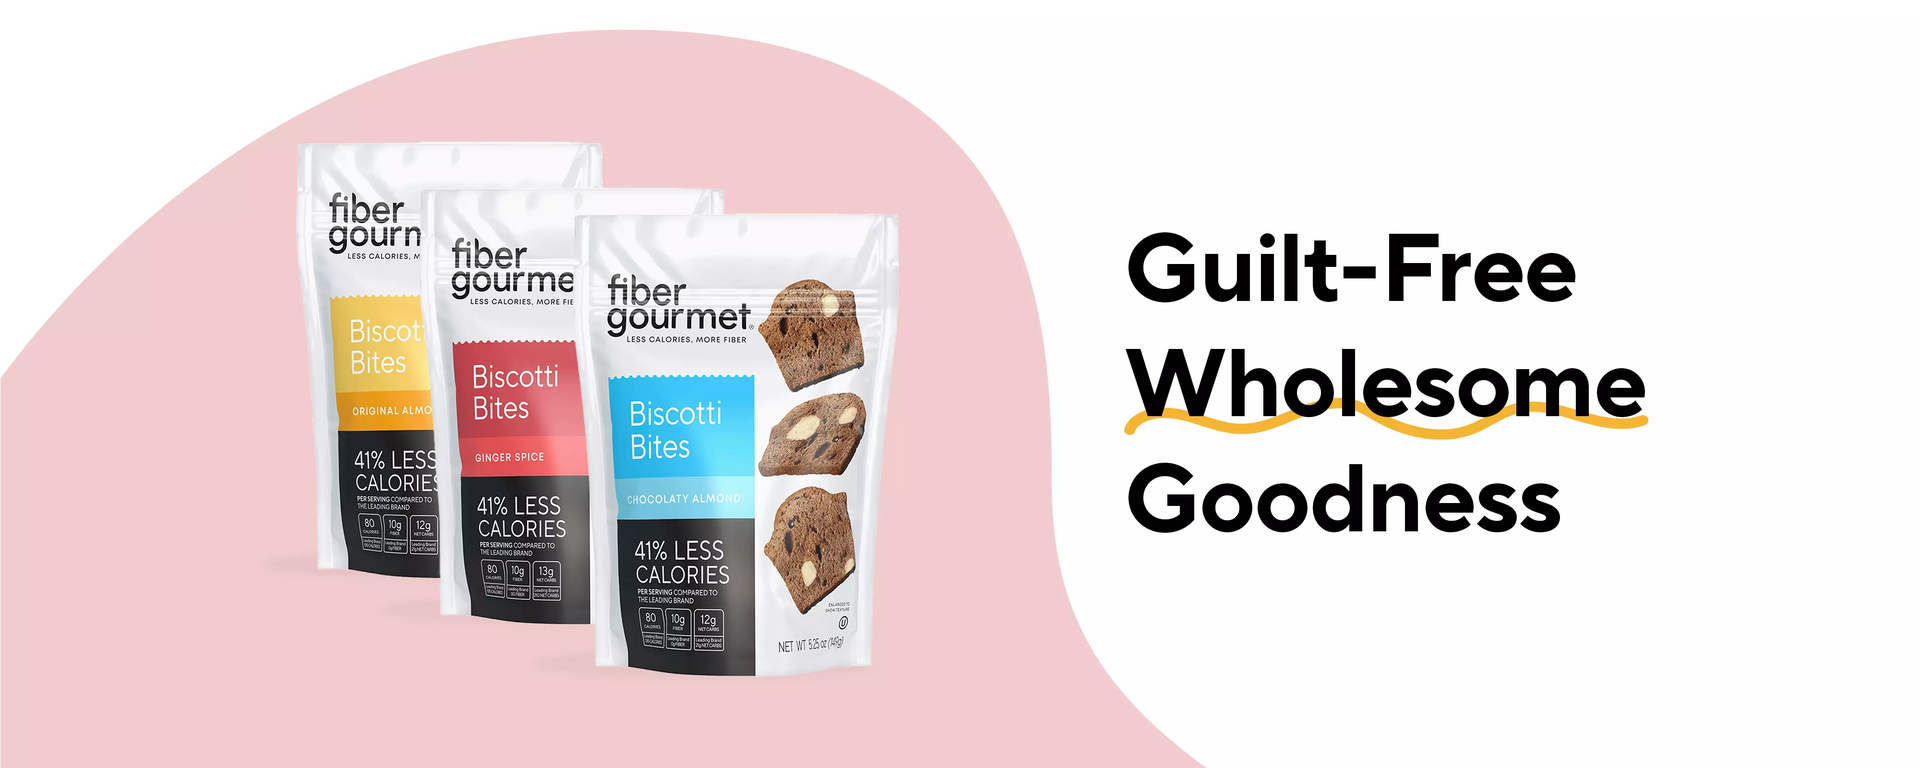 Load video: Guilt Free Wholesome products, delicious taste.